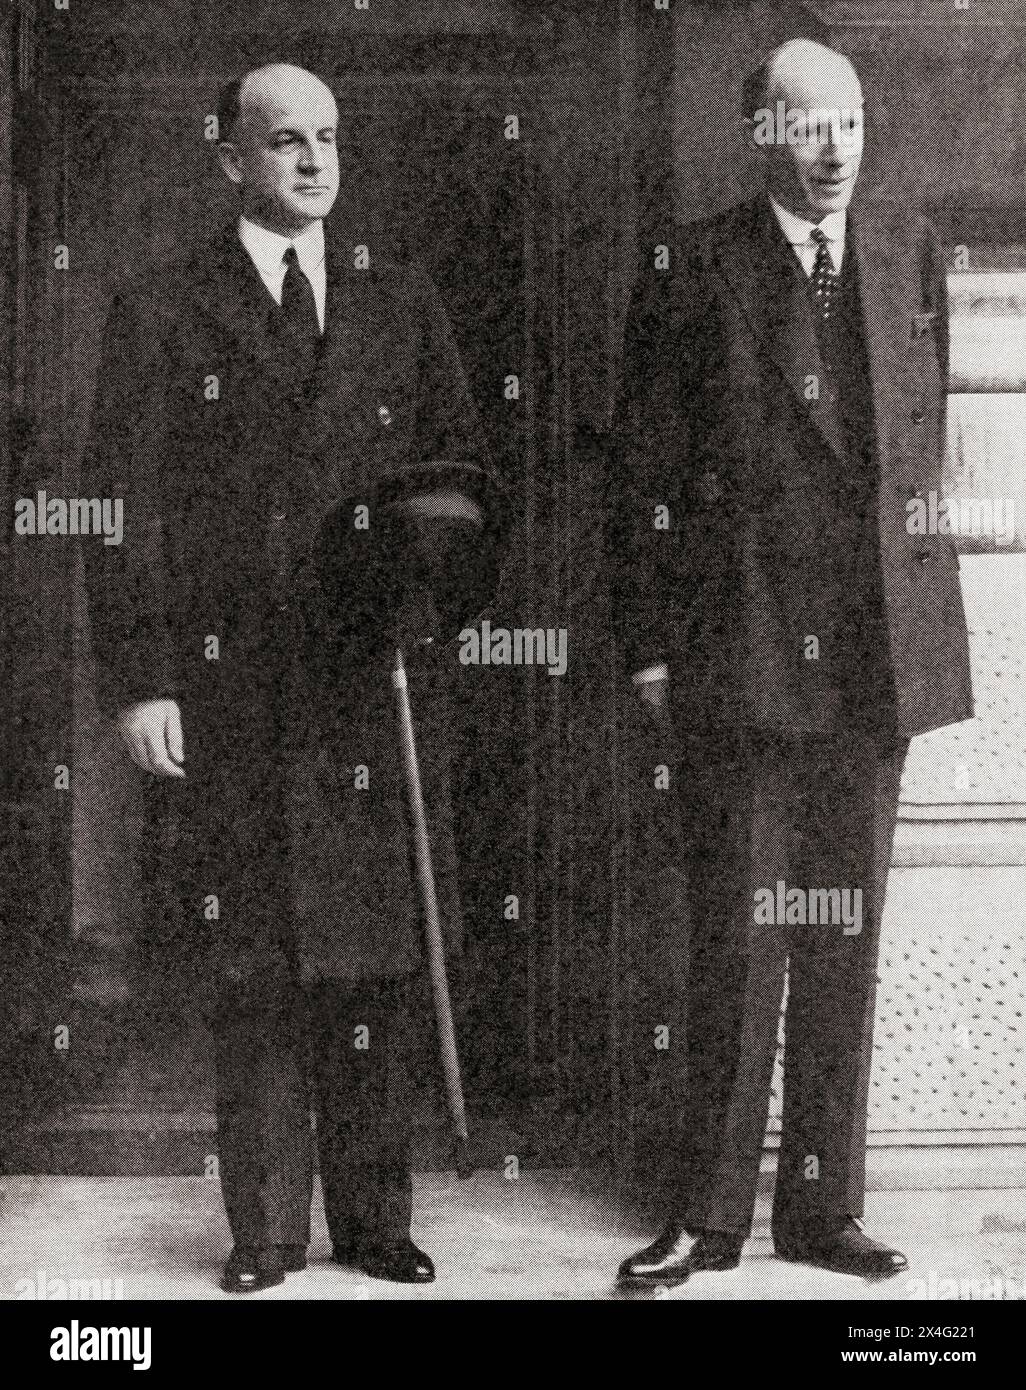 Mr Sumner Welle's European Tour,10-20 March, 1940, seen here, left, with Viscount Halifax.  Benjamin Sumner Welles, 1892 – 1961. American government official, diplomat and 11th United States Under Secretary of State.  Edward Frederick Lindley Wood, 1st Earl of Halifax, 1881 – 1959, aka The Lord Irwin from 1925 until 1934 and The Viscount Halifax from 1934 until 1944. British Conservative politician of the 1930's.  From The War in Pictures, First Year. Stock Photo